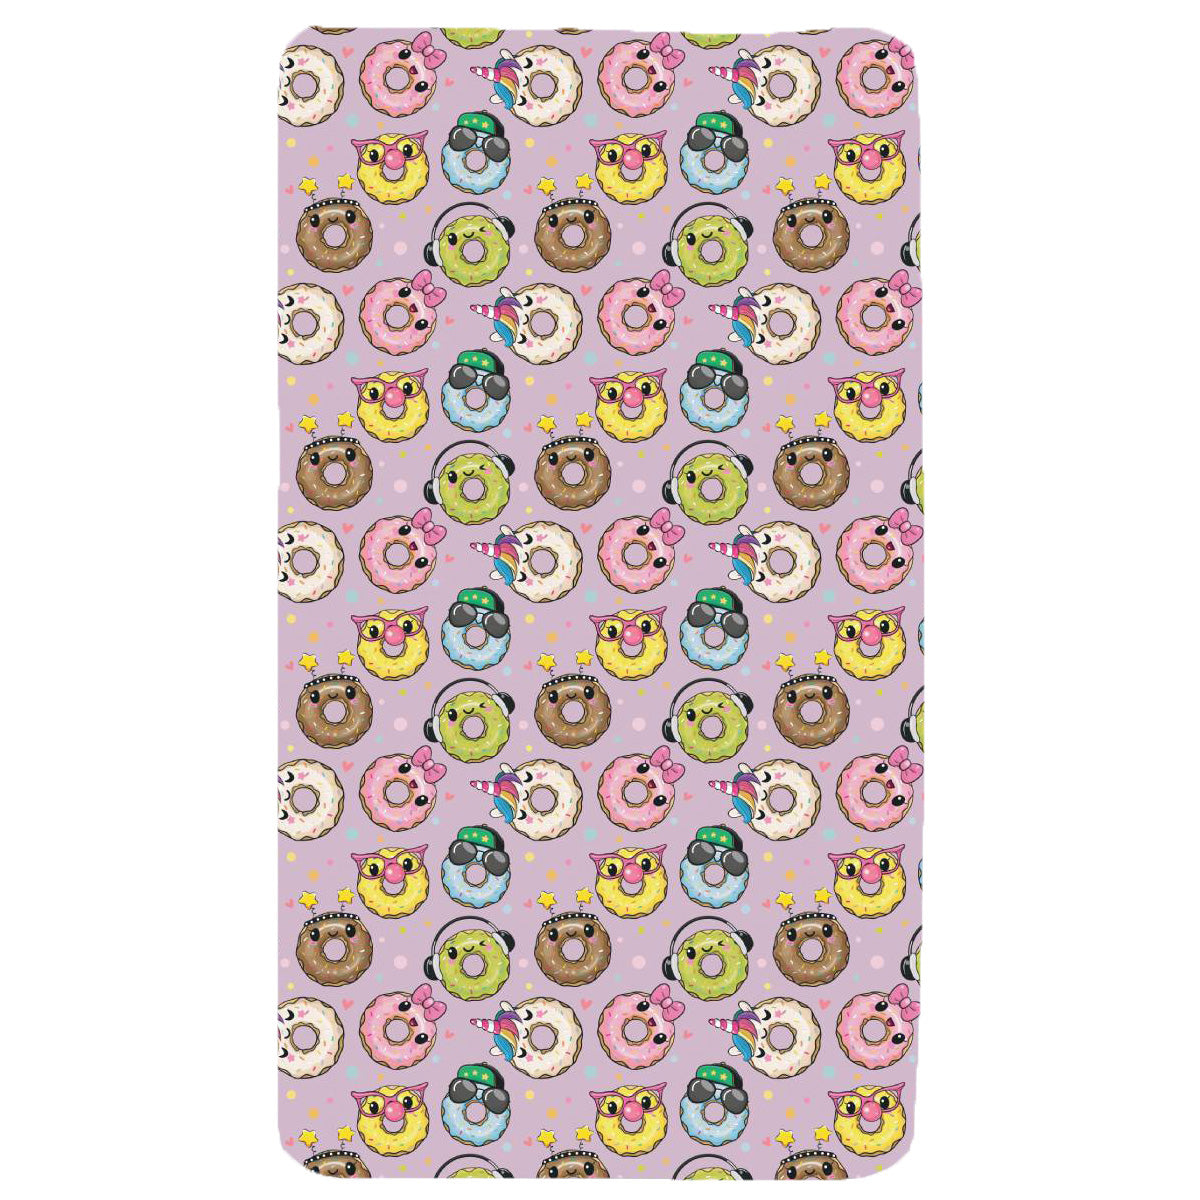 Donuts - Sensory Fitted Bed Sheet